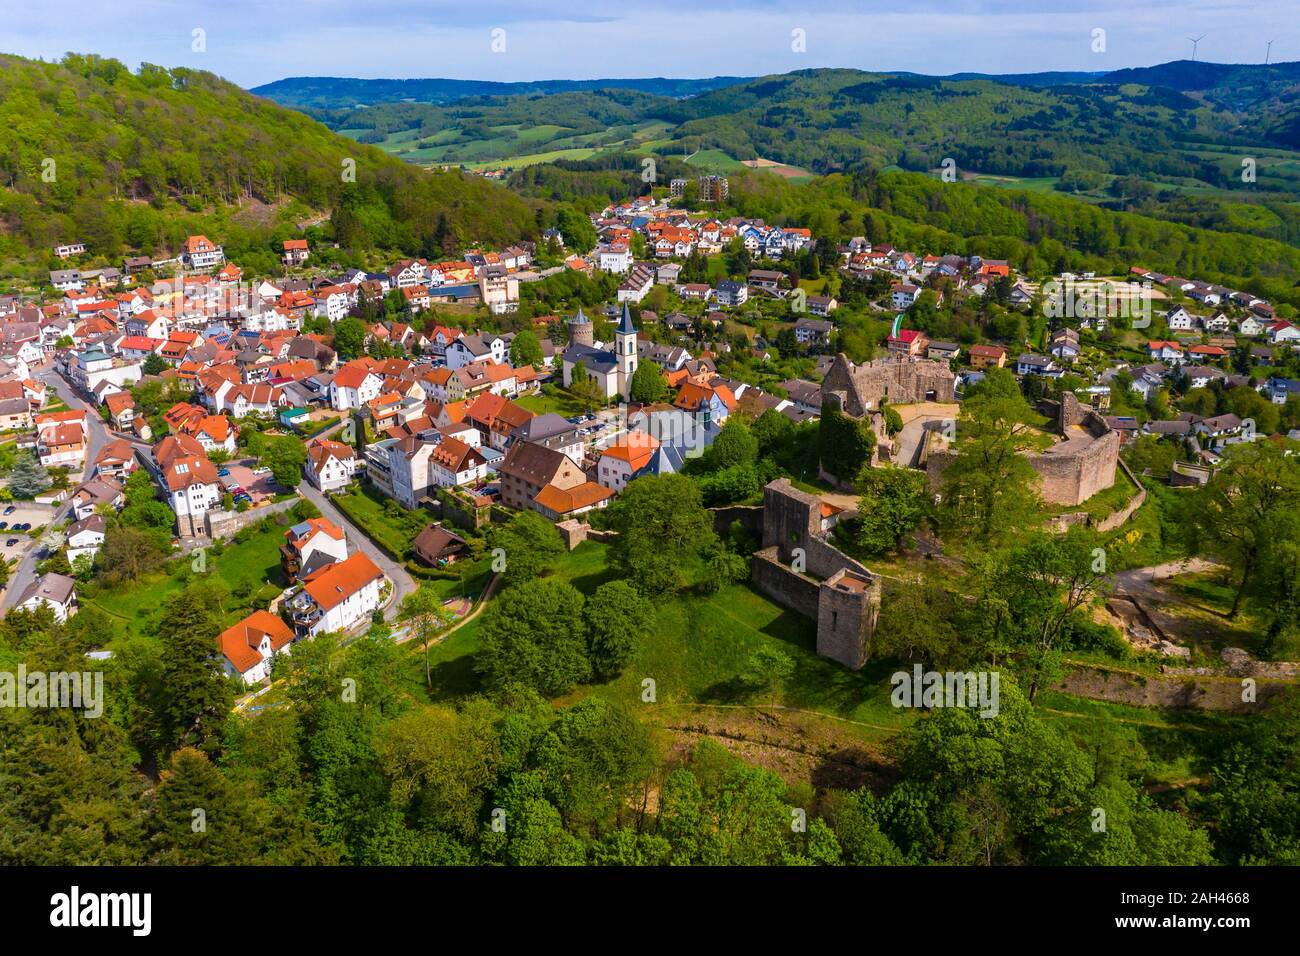 Germany, Hesse, Lindenfels, Aerial view of medieval town with ruined castle in center Stock Photo